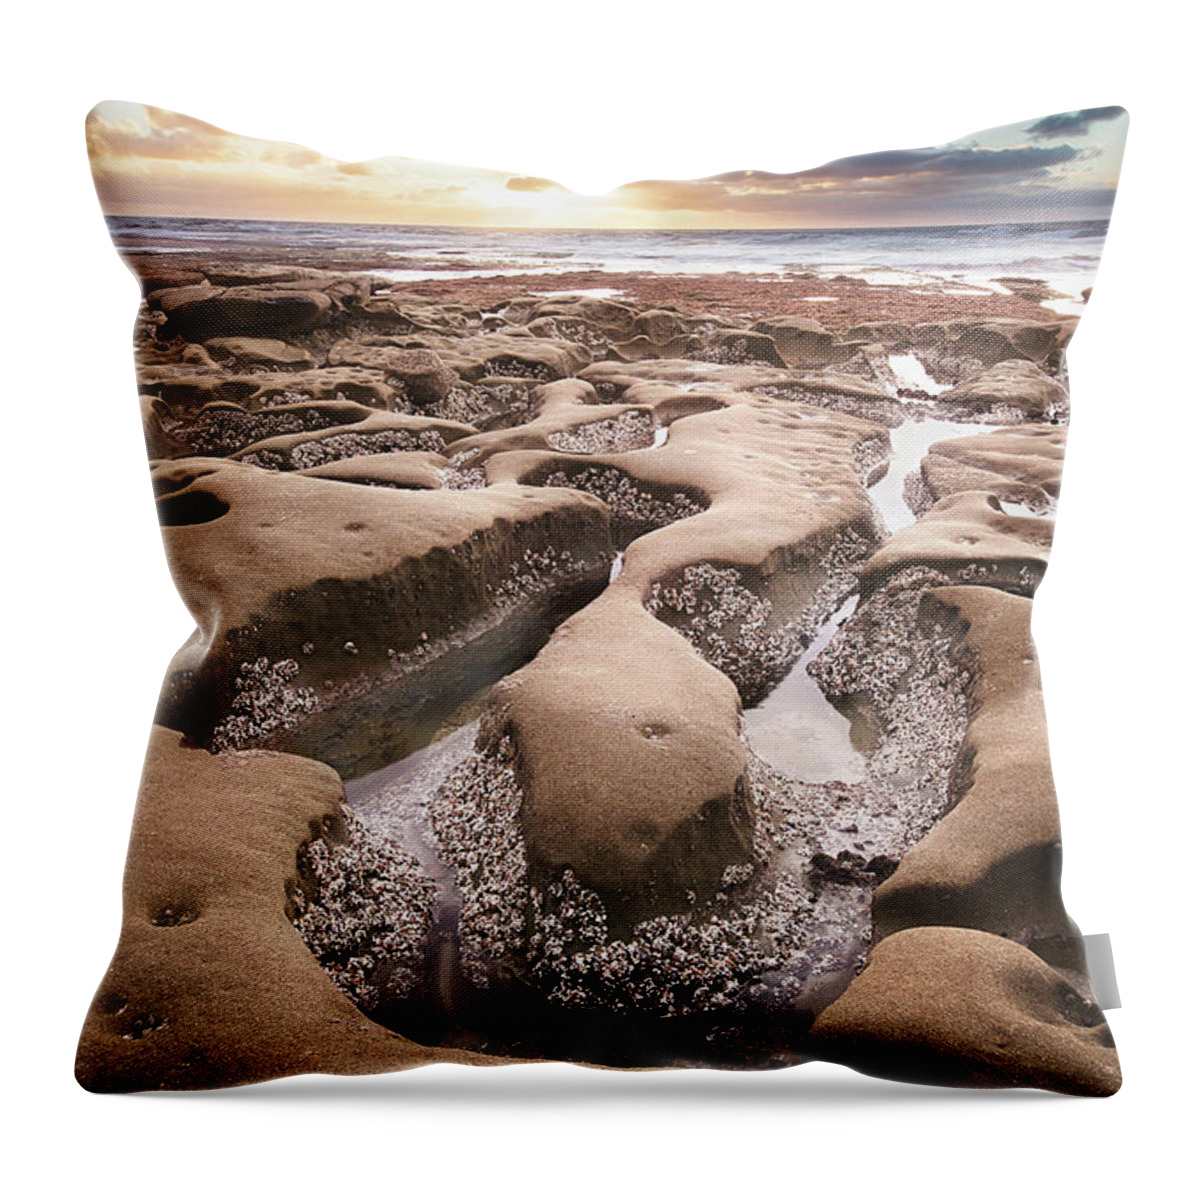 Beautiful Throw Pillow featuring the photograph Hospitals Reef La Jolla by Gary Geddes